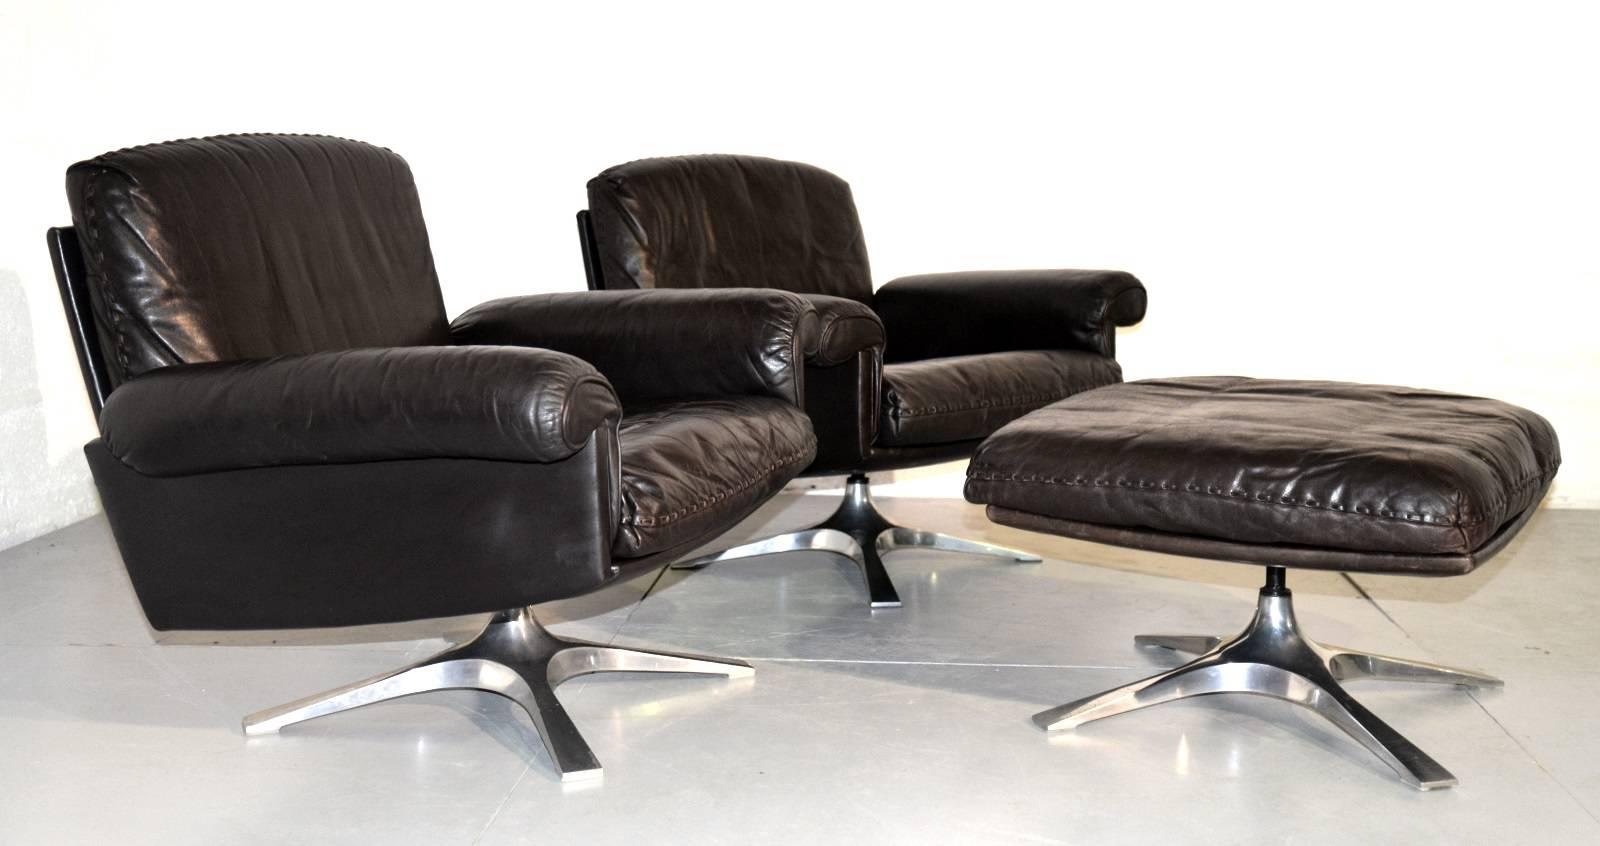 We bring you a pair of highly desirable vintage De Sede DS-31 swivel lounge club armchairs and ottoman in beautiful soft dark brown aniline leather with whipstitch edge detail. Standing on a brushed aluminium swivel bases these armchairs were hand